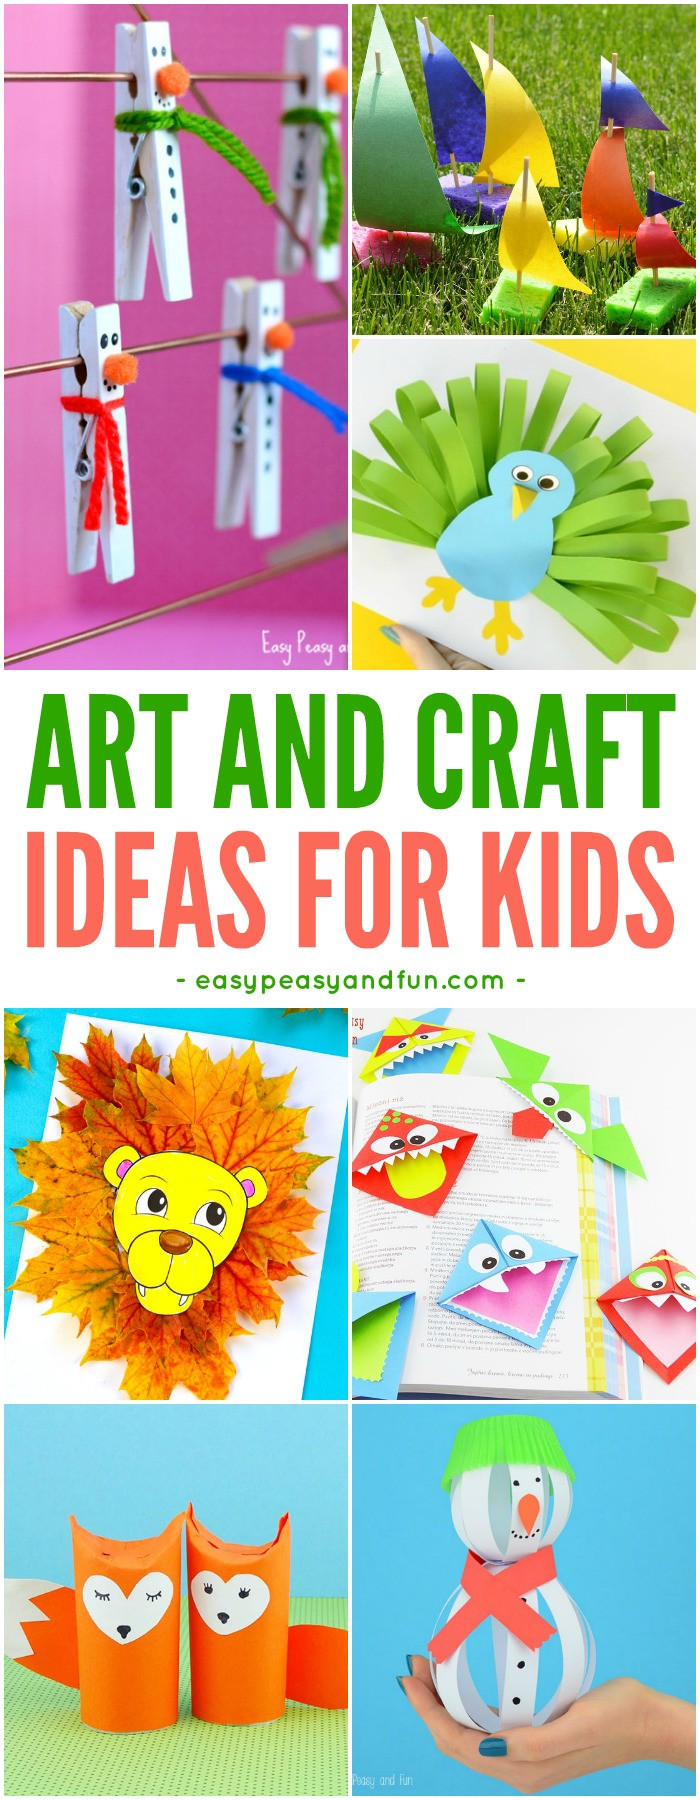 Arts &amp; Crafts For Kids
 Crafts For Kids Tons of Art and Craft Ideas for Kids to